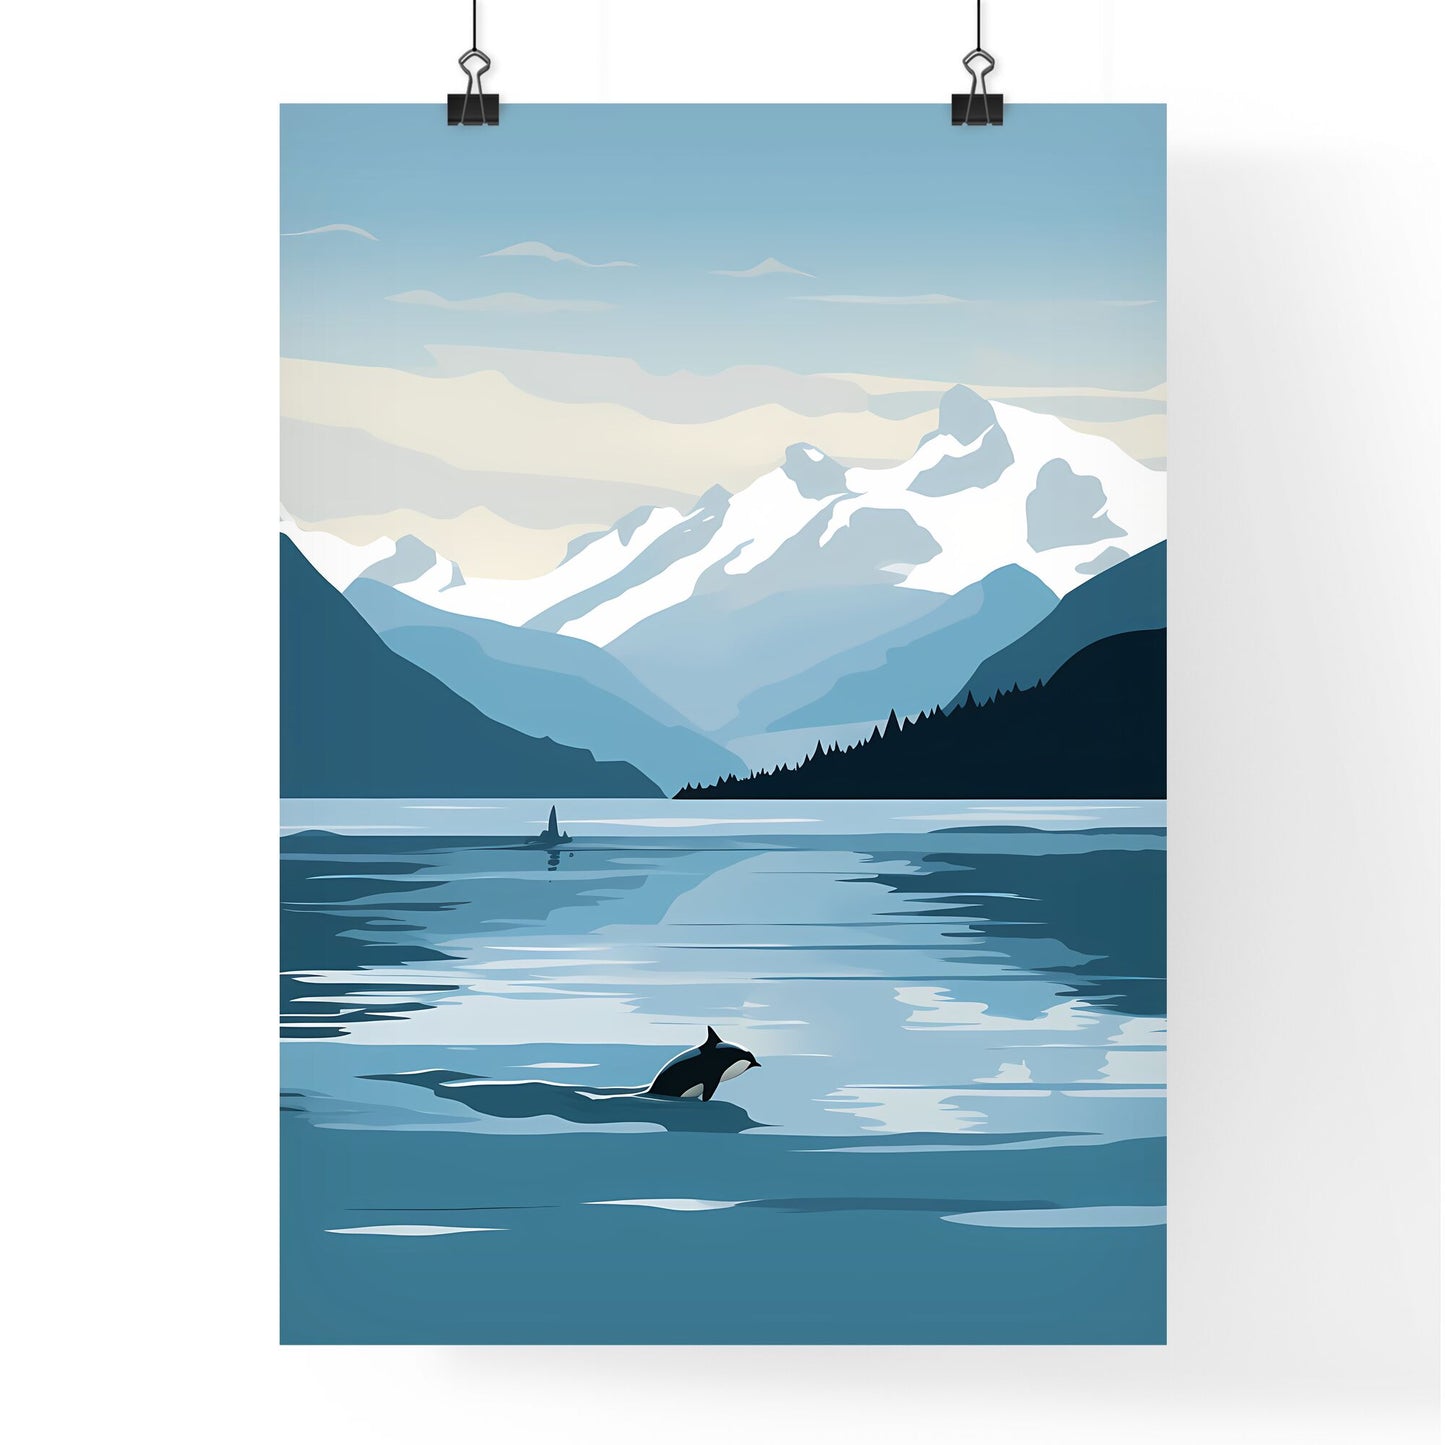 A Poster of glacier bay national park - A Dolphin Swimming In A Lake With Mountains In The Background Default Title